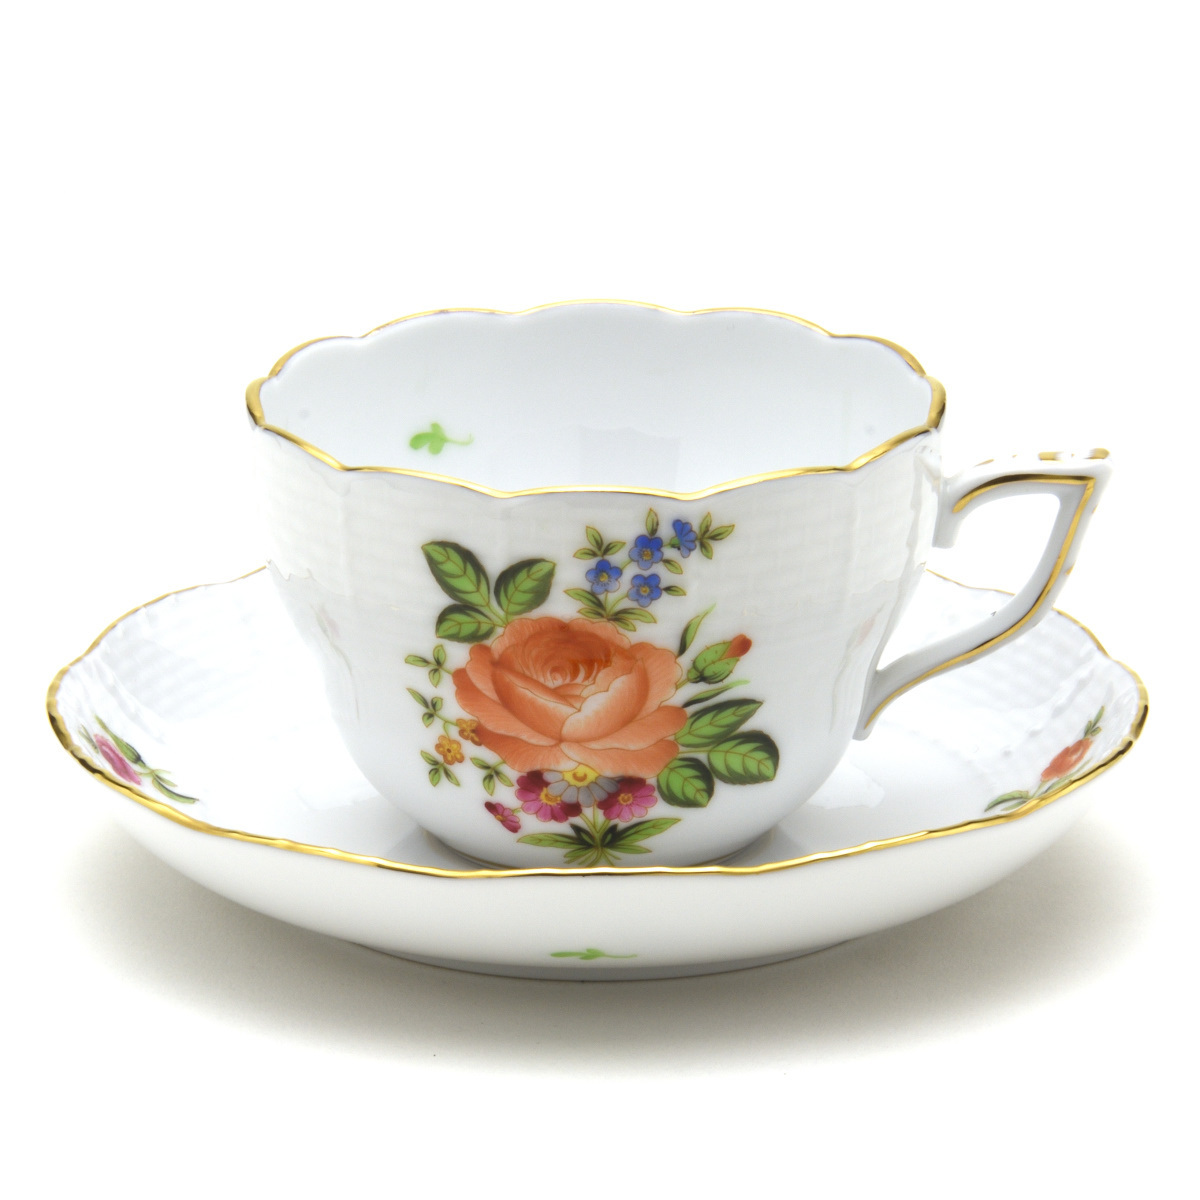 Herend Multipurpose Cup & Saucer Hand Painted Western Tableware Small Rose Bouquet/Orange Coffee Tea Cup Made in Hungary New, tea utensils, Cup and saucer, coffee, For both tea and tea